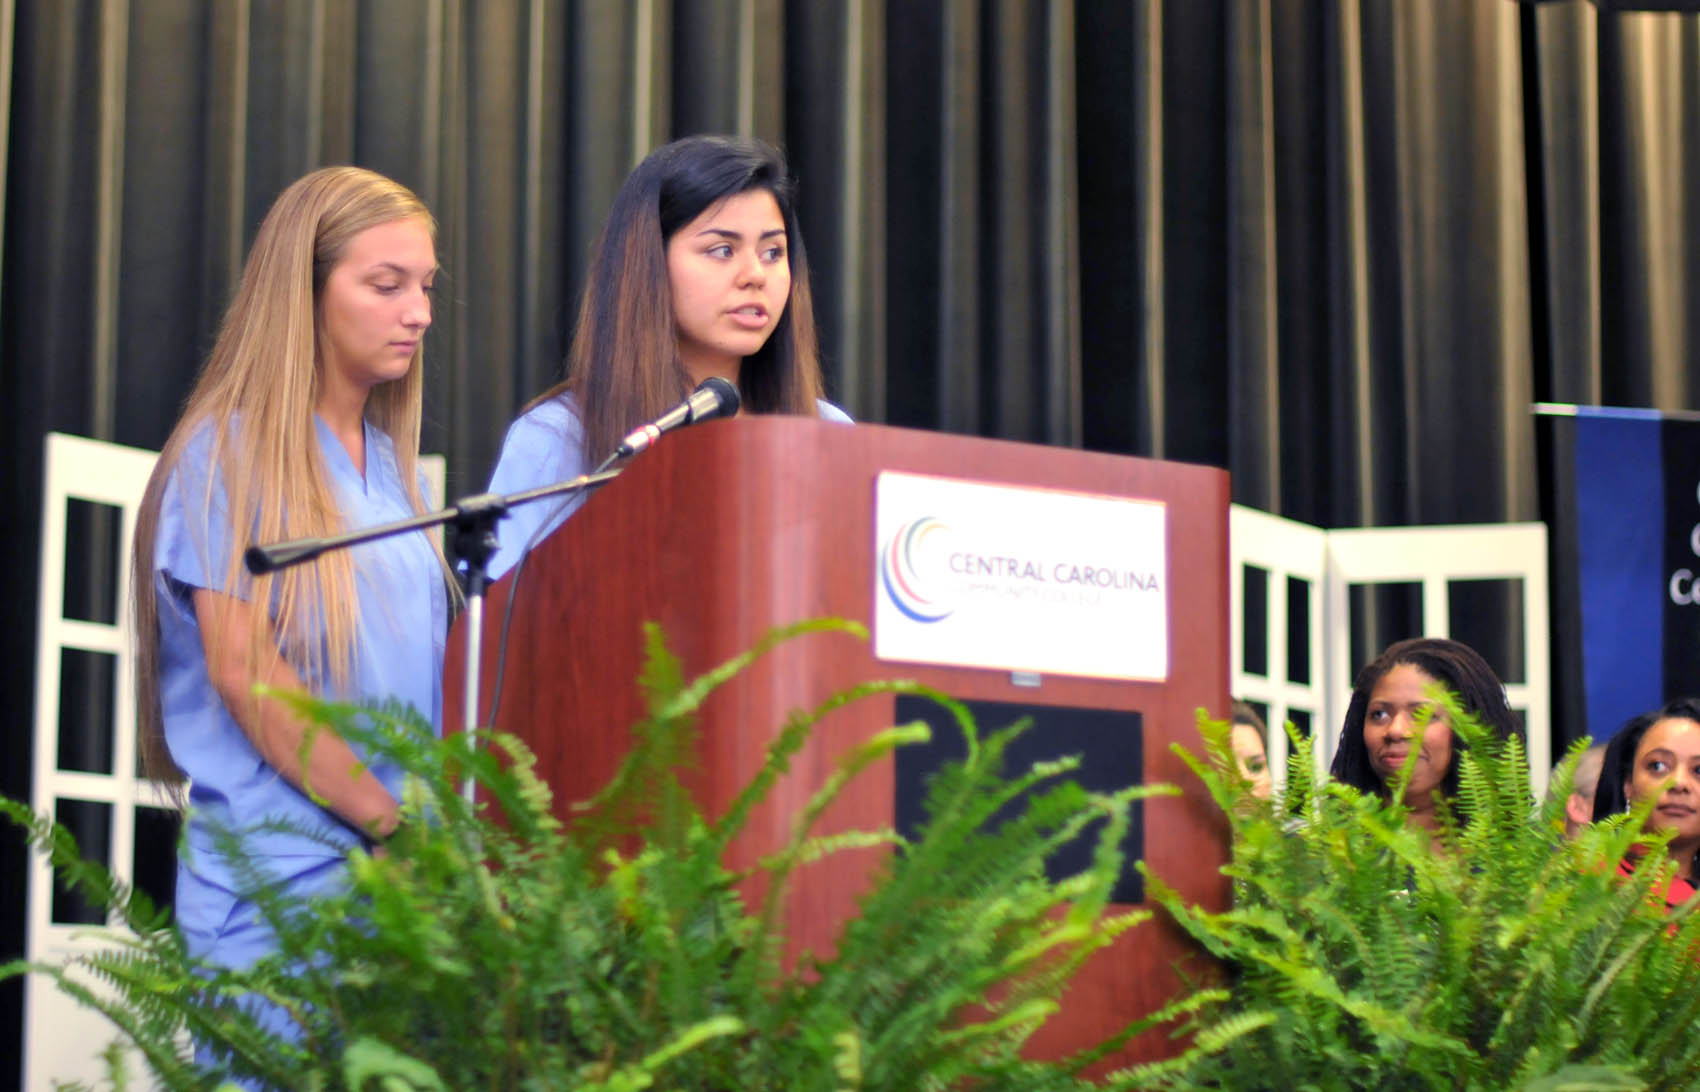 Click to enlarge,  Brooke Madison and Zuheryi Lievano, of Harnett County, were among the student speakers at the Central Carolina Community College Continuing Education medical programs graduation. The event was held May 26 at the Dennis A. Wicker Civic Center in Sanford. For more information about Continuing Education medical programs, call Lennie Stephenson, CCCC's Director of Continuing Education medical programs, at 910-814-8833 or email lstephenson@cccc.edu. 